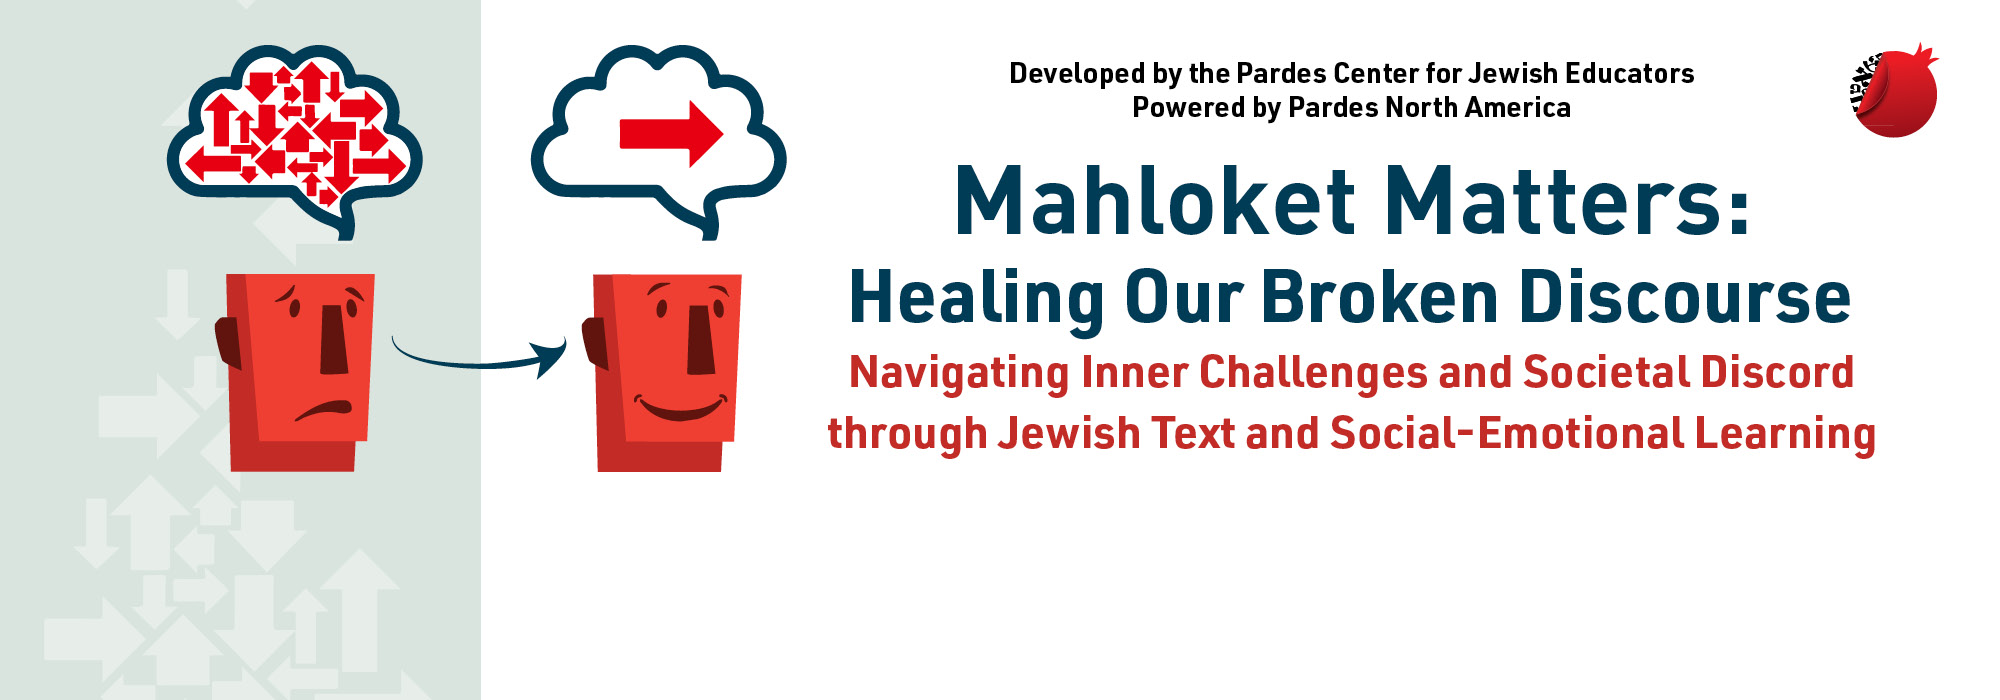 Mahloket Matters: Healing Our Broken Discourse – Navigating Inner Challenges and Societal Discord through Jewish Text and Social-Emotional Learning.